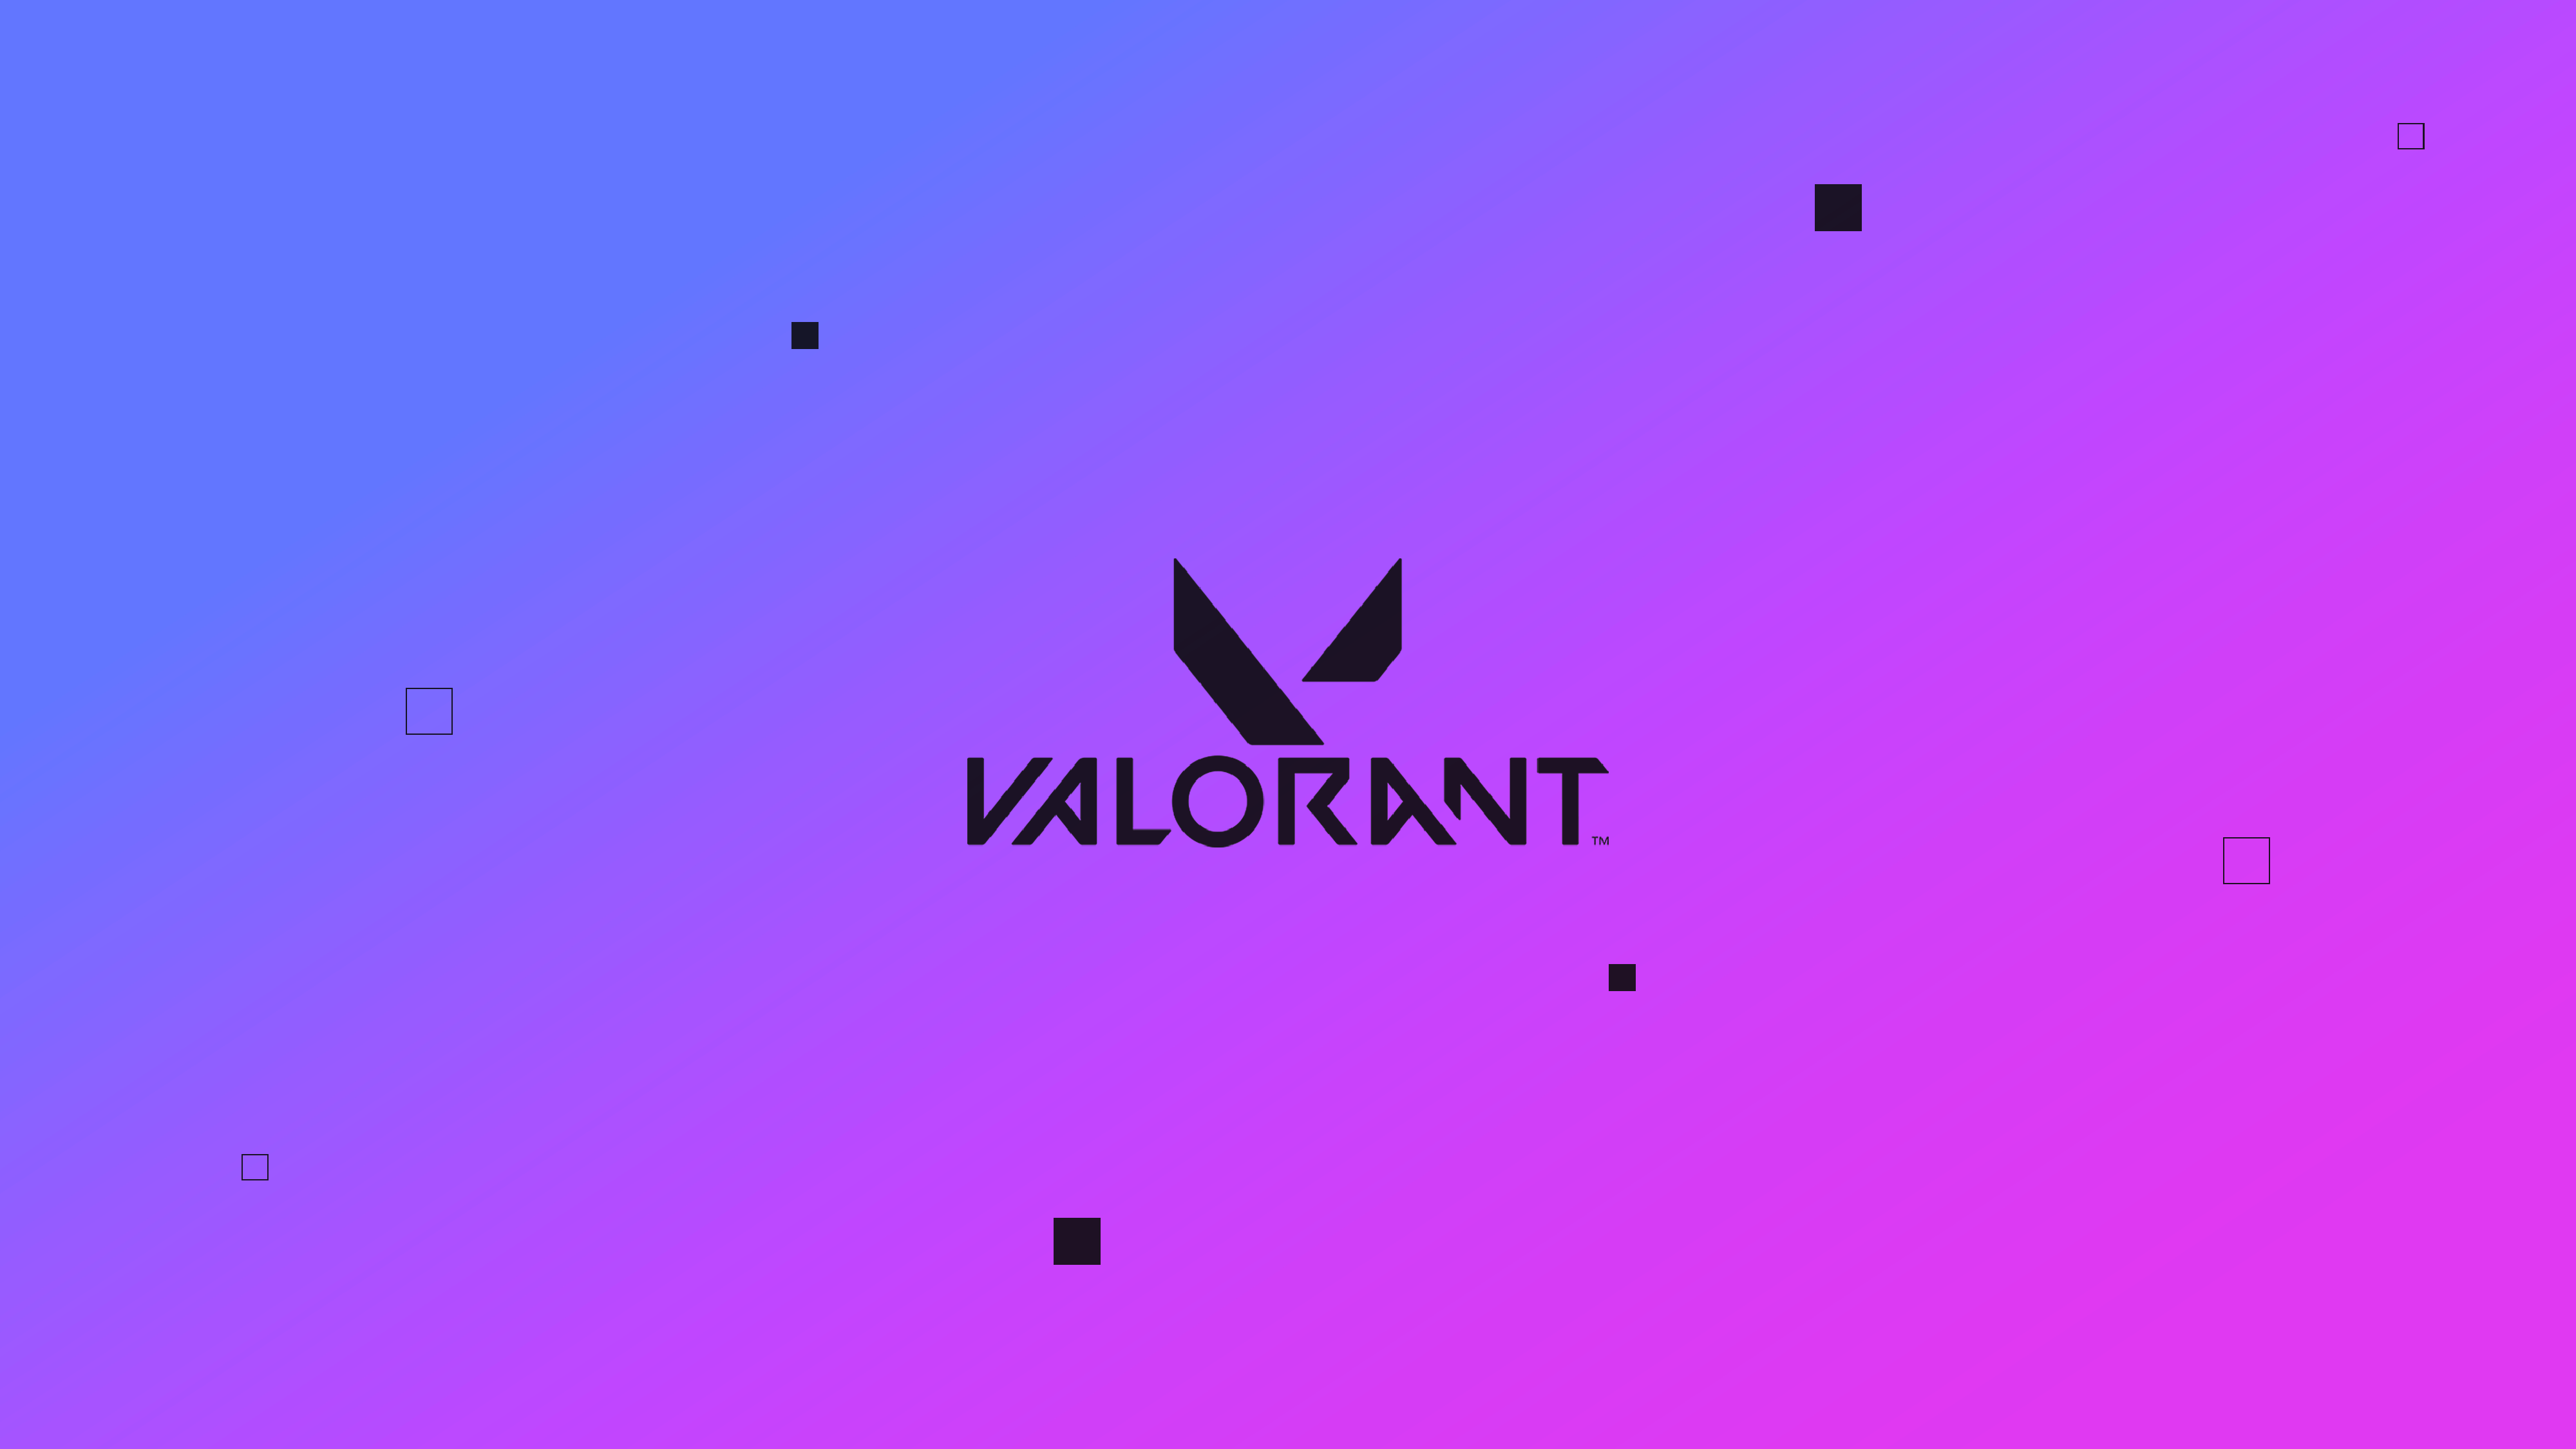 Updated my desktop for Valorant because the branding begged